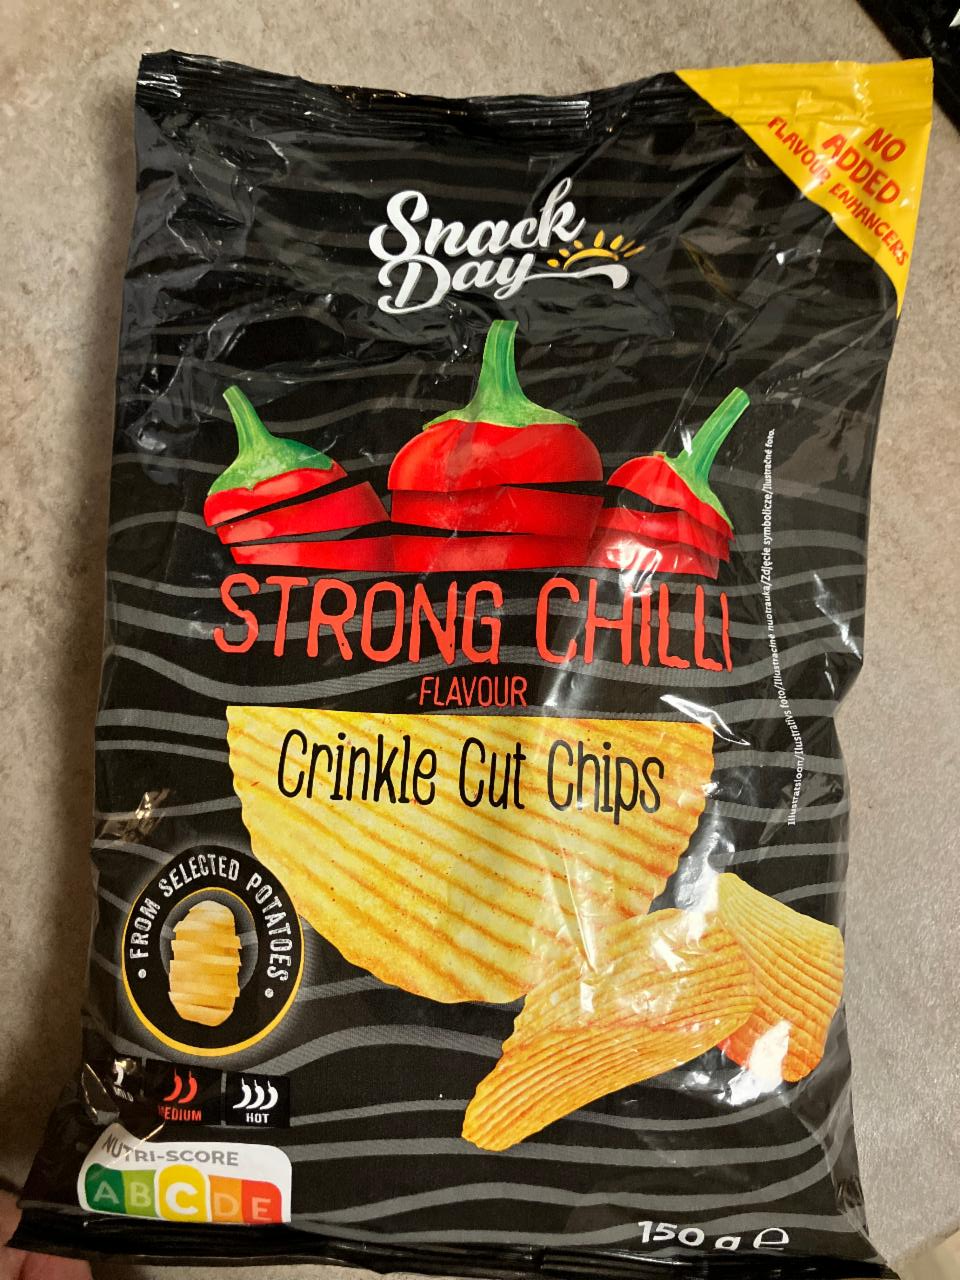 Fotografie - Strong Chilli flavour Crinkle Cut Chips Snack Day